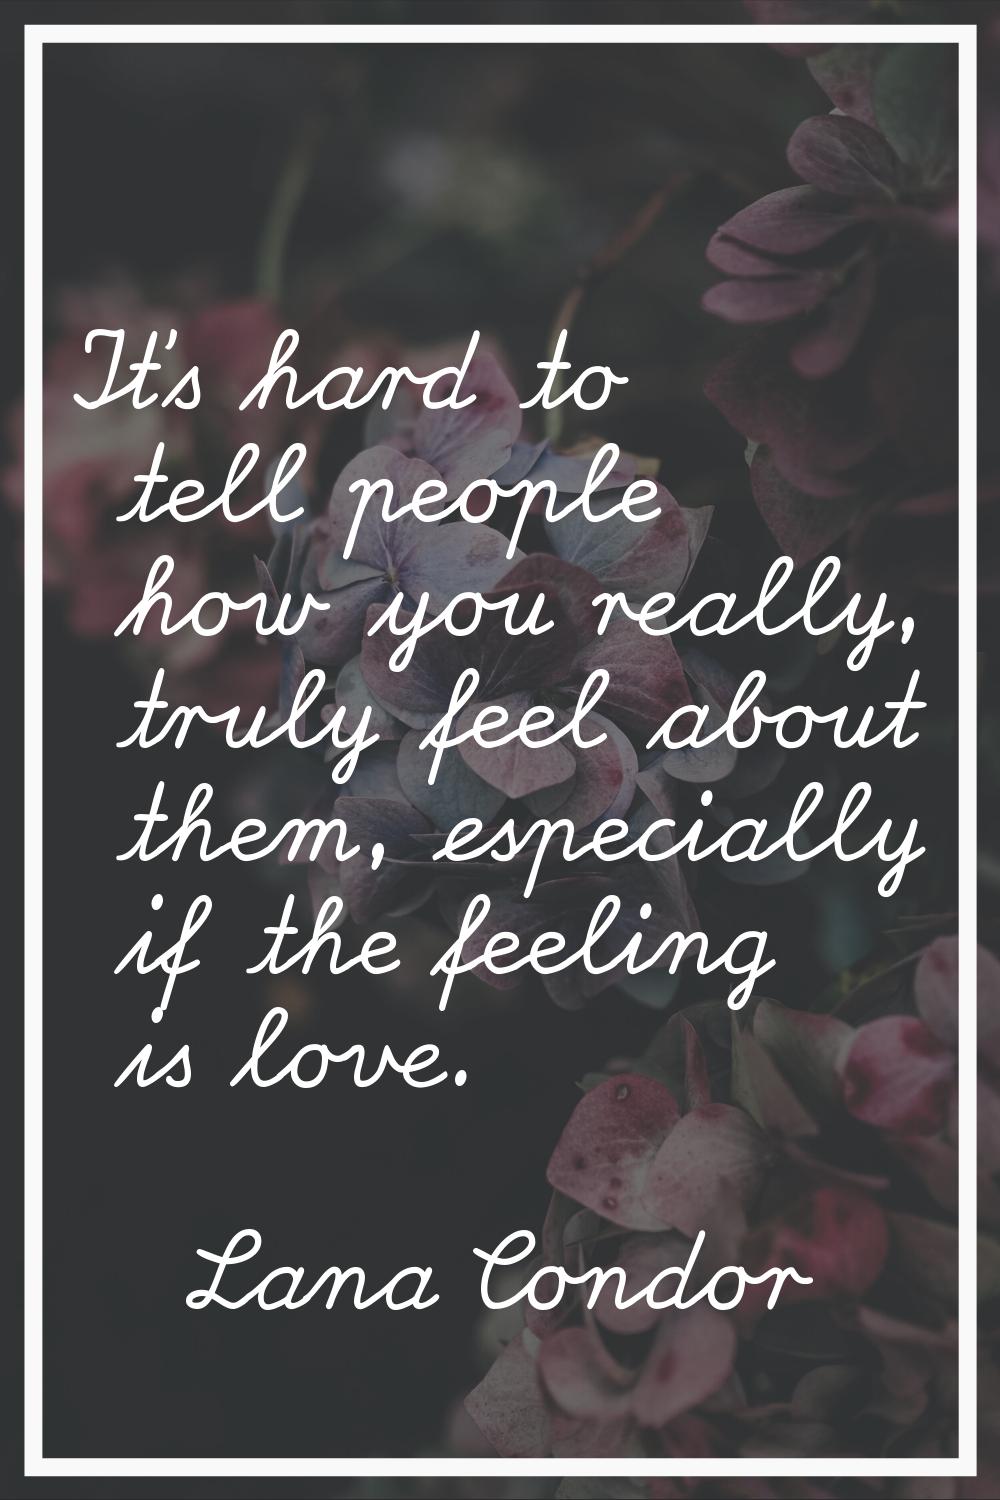 It's hard to tell people how you really, truly feel about them, especially if the feeling is love.